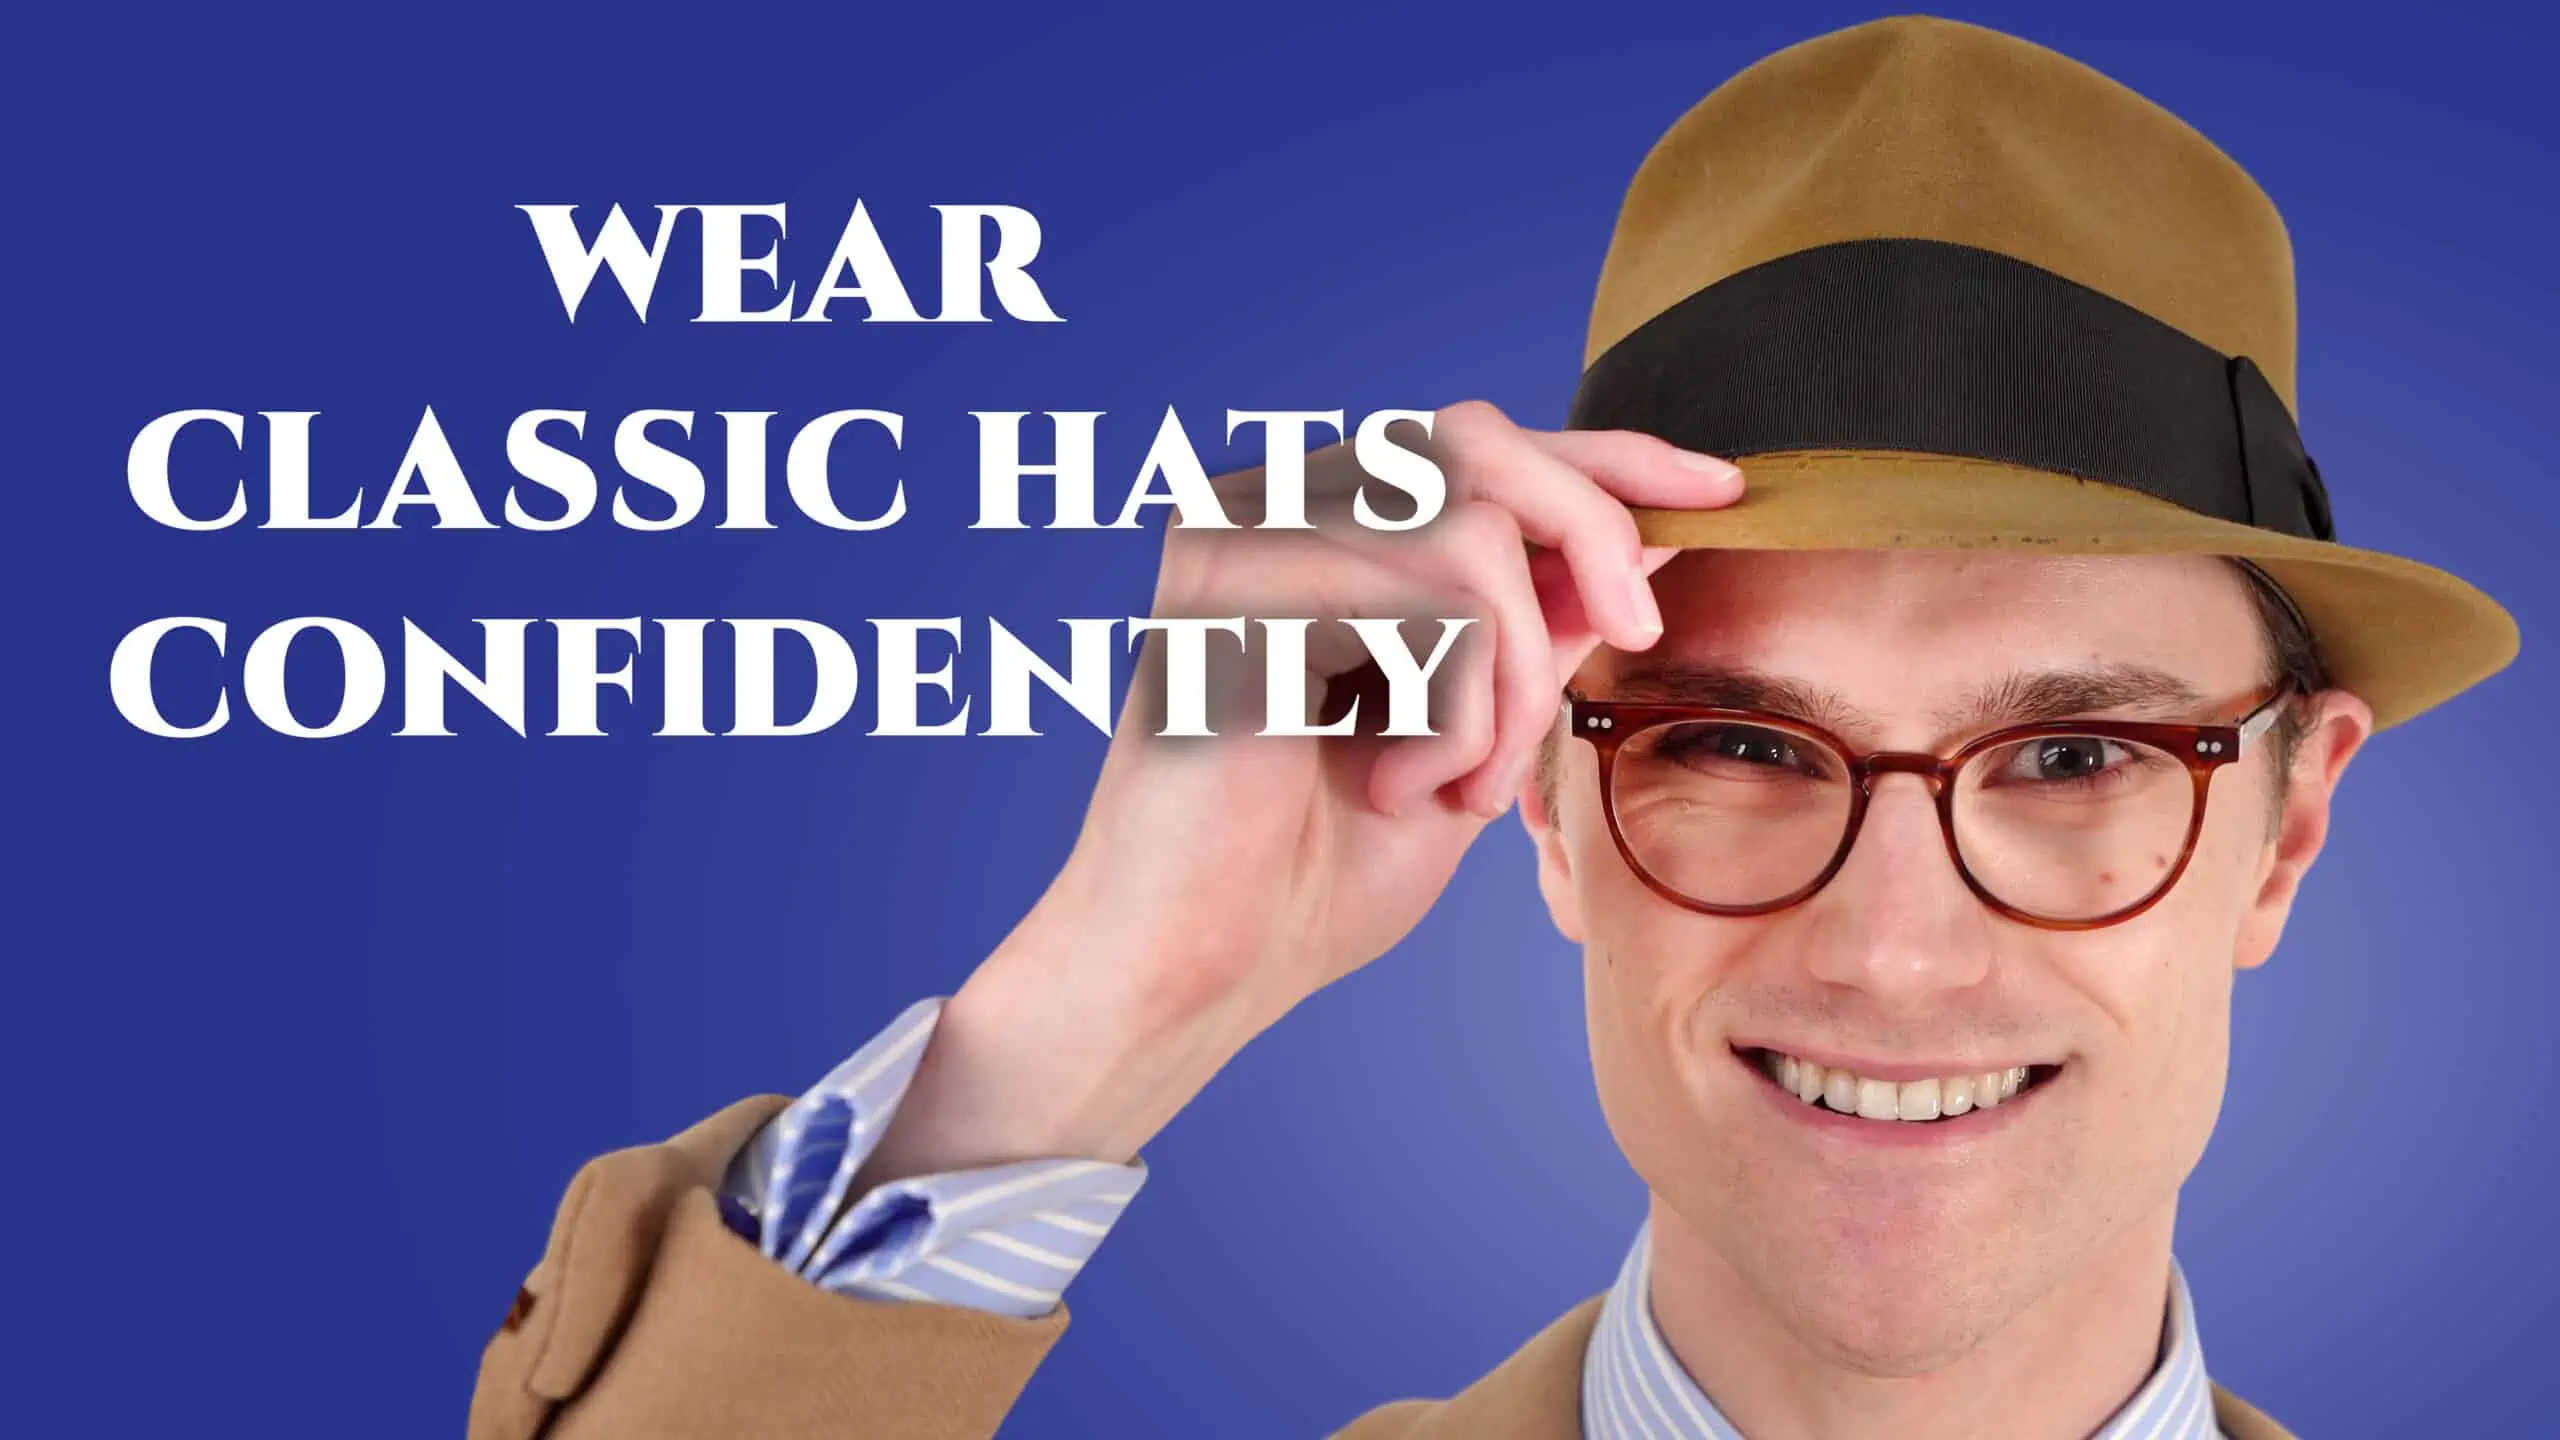 wear classic hats confidently 3840x2160 scaled